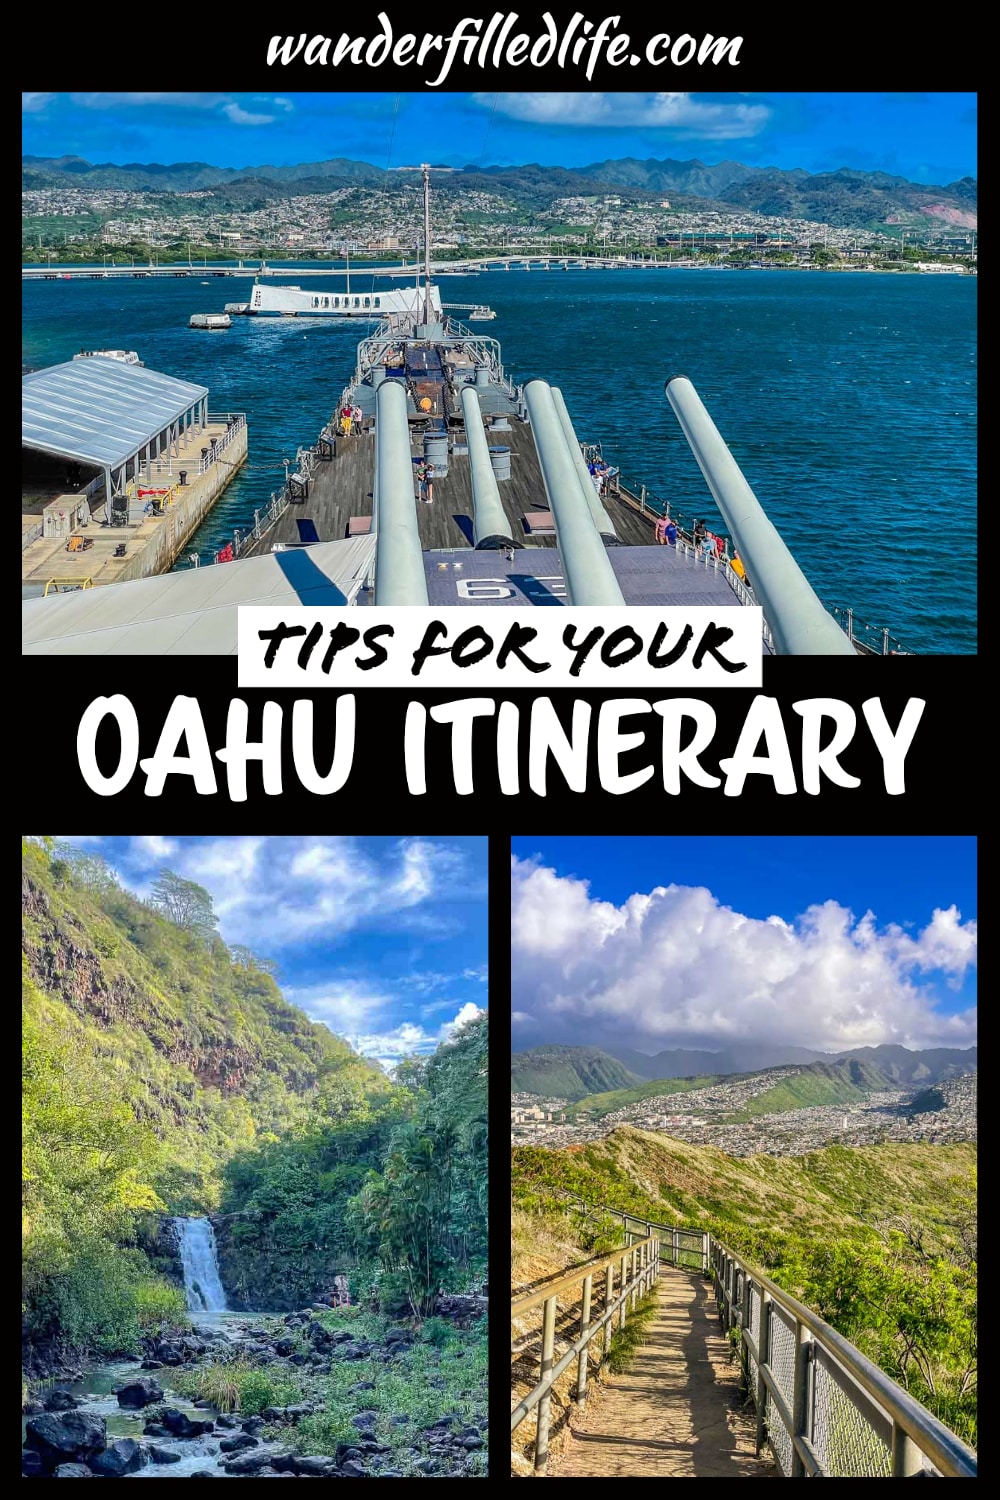 Need help planning your Oahu itinerary? We've got suggestions for how to spend your time, whether you have a single day or a full week.